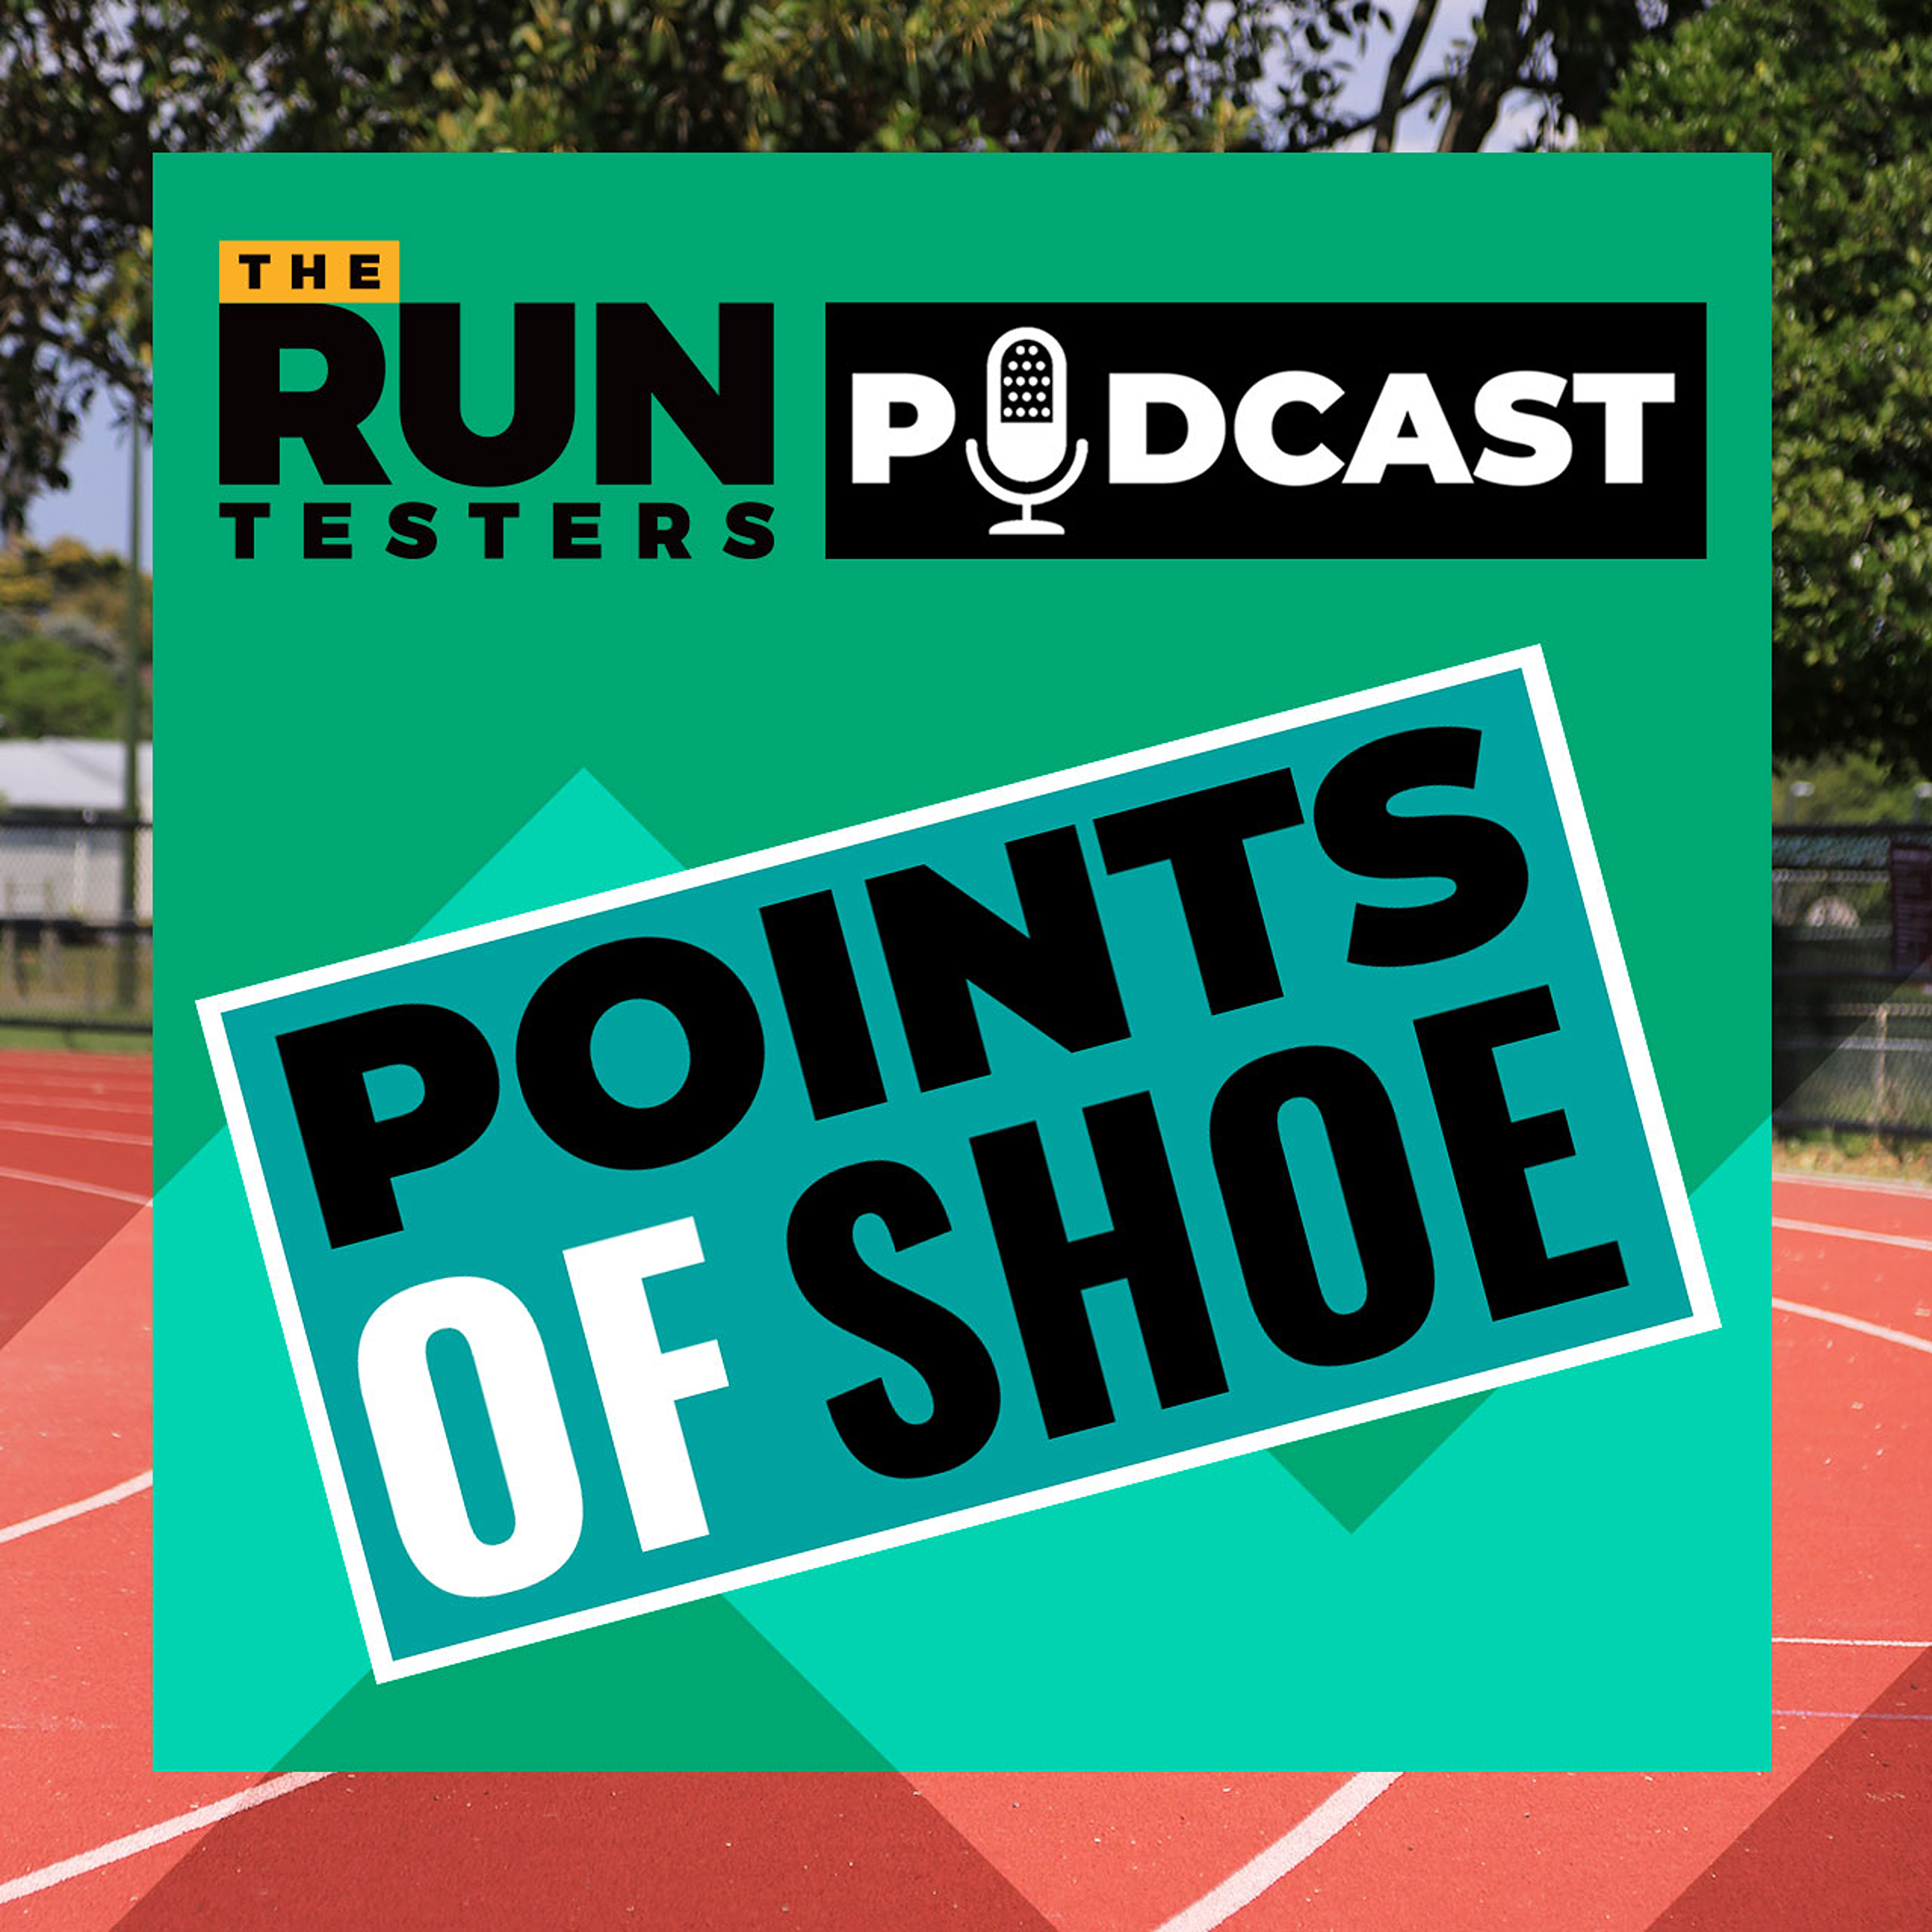 Running Shoe Questions Answered: Points of Shoe Episode 5